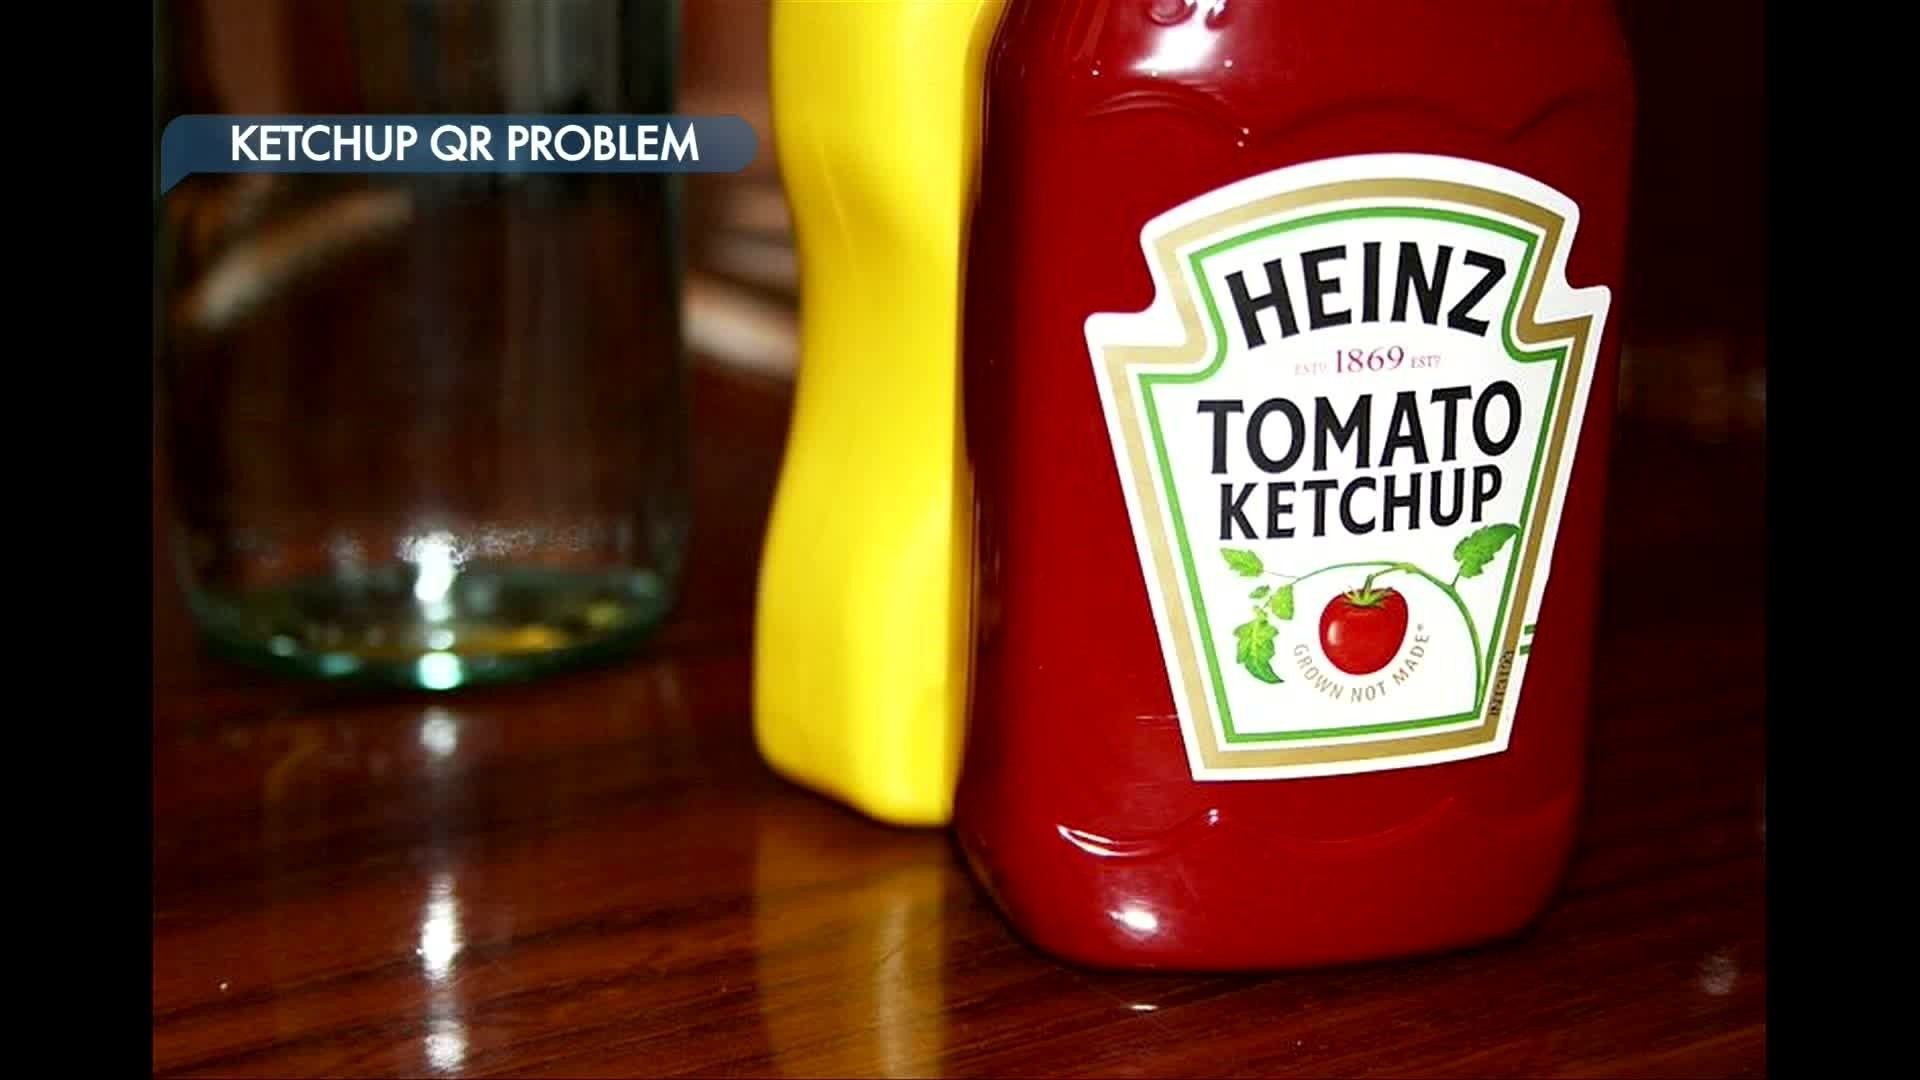 Heinz Apologizes For Ketchup Bottle Qr Code Linked To Xxx Site